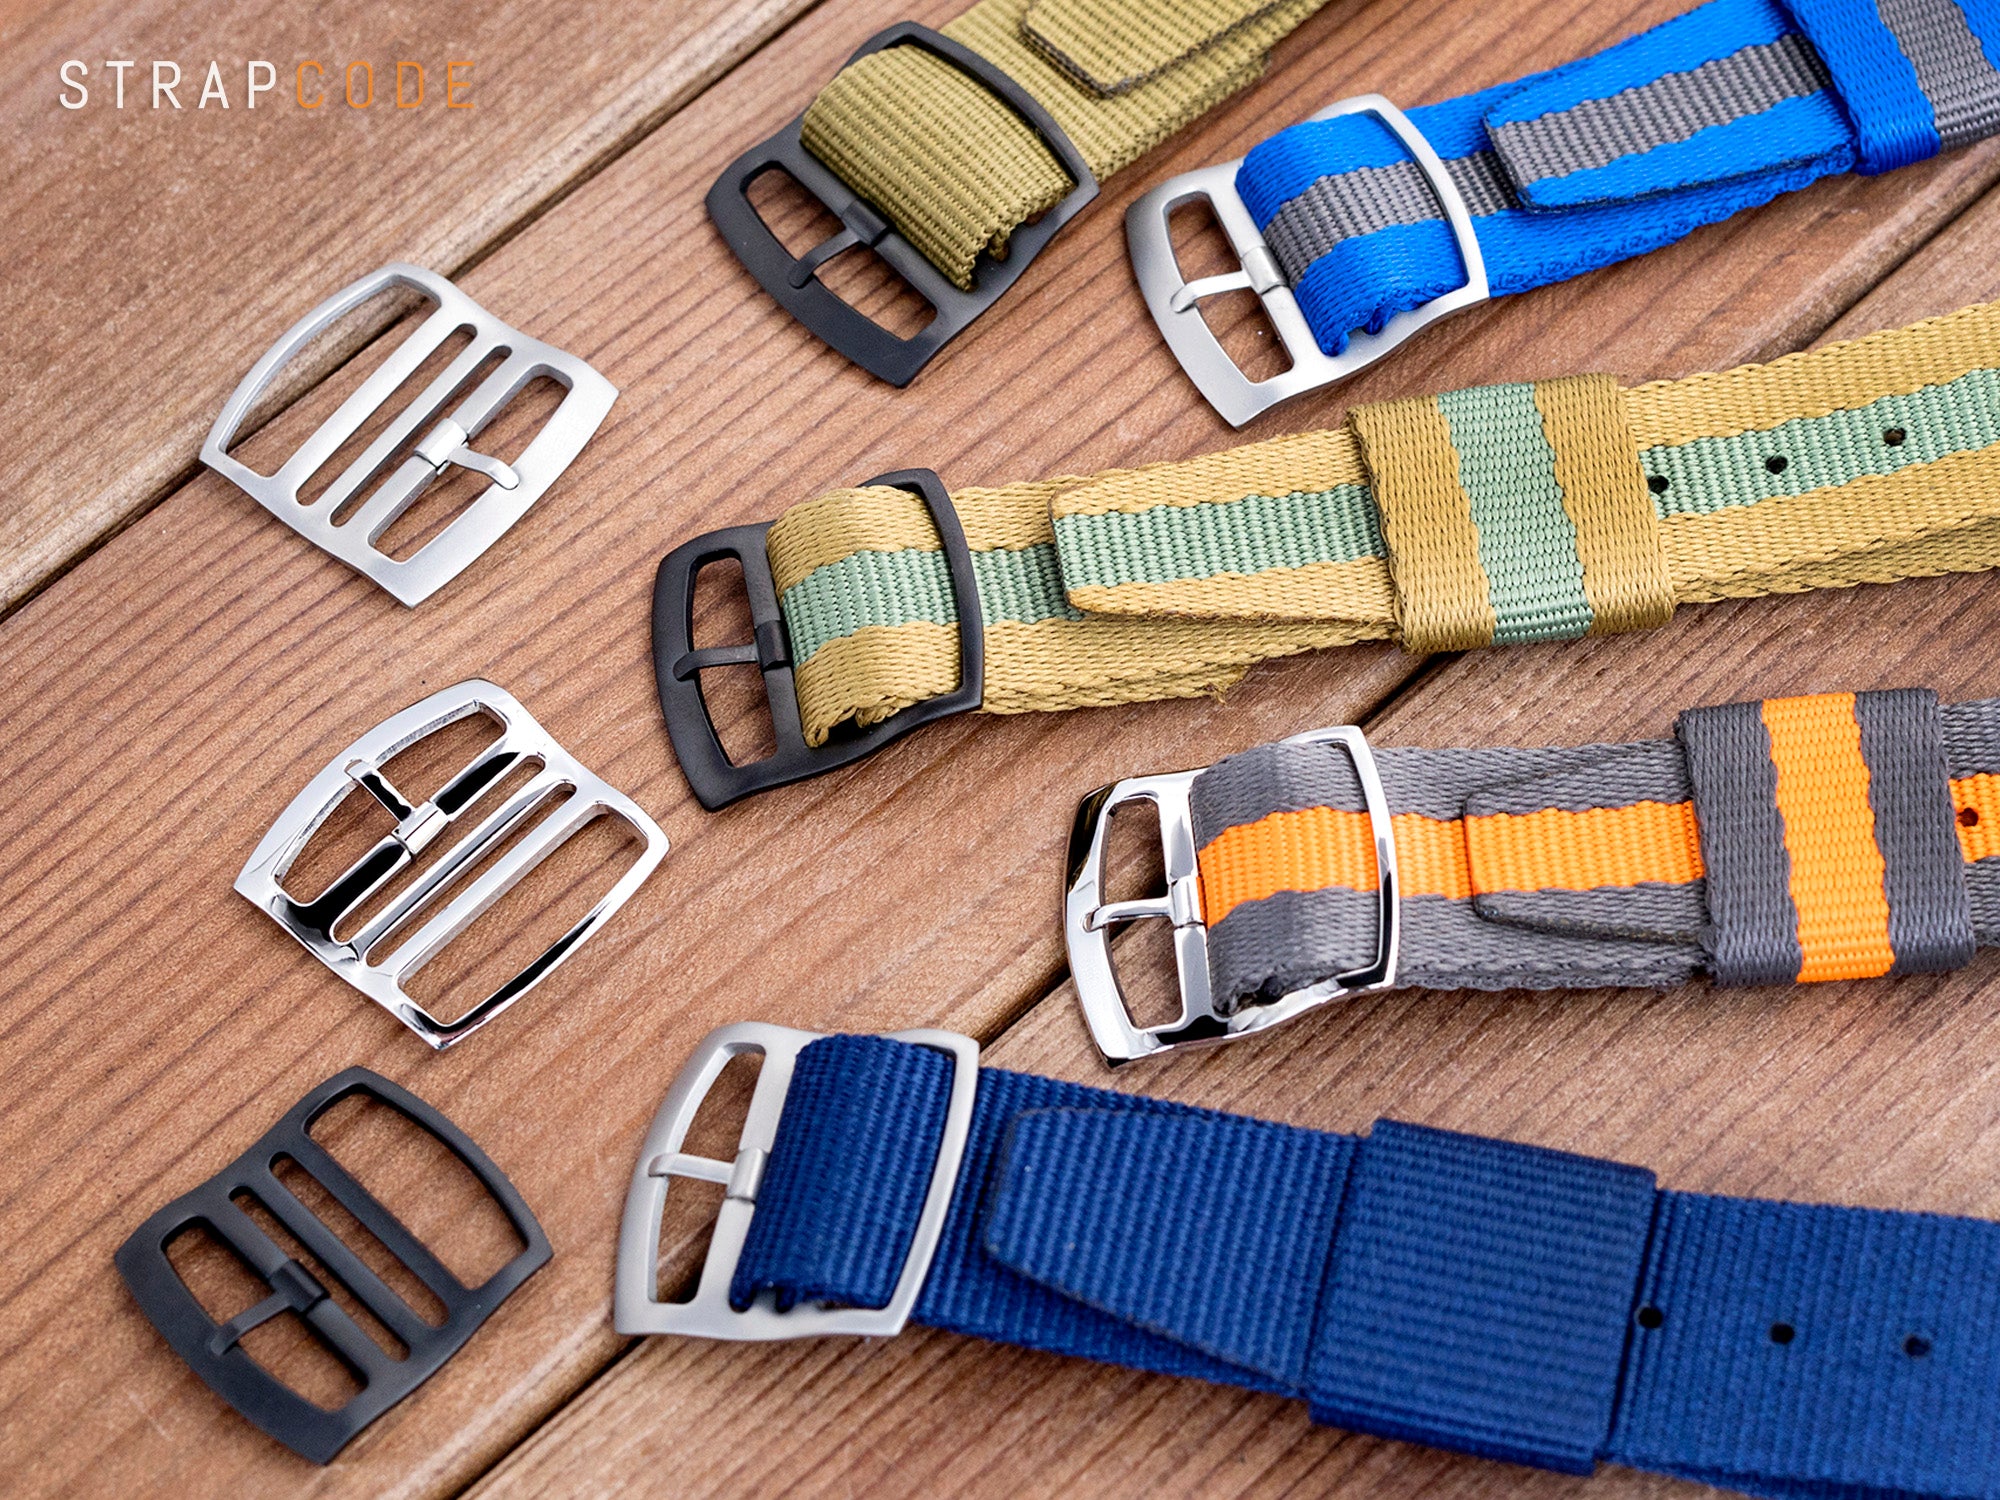 Nato Military watch straps in various lug sizes and colors light weight and easy styling